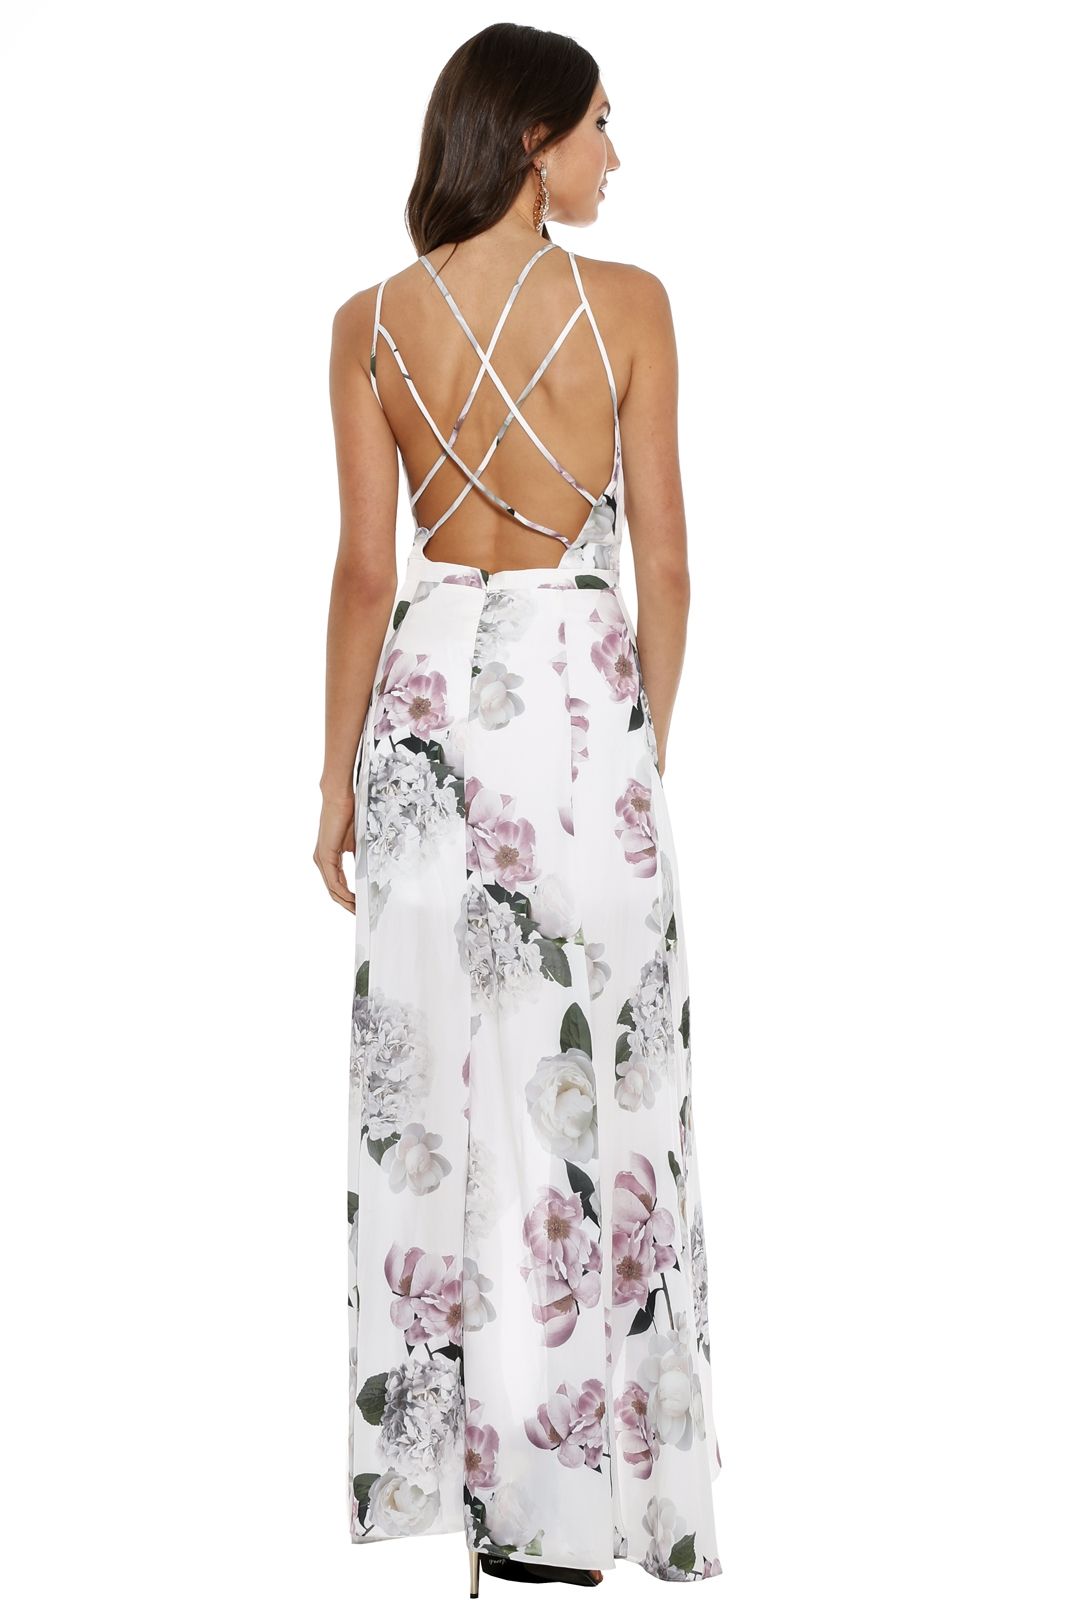 Fame and Partners - Floral Days Dress - White Print - Back